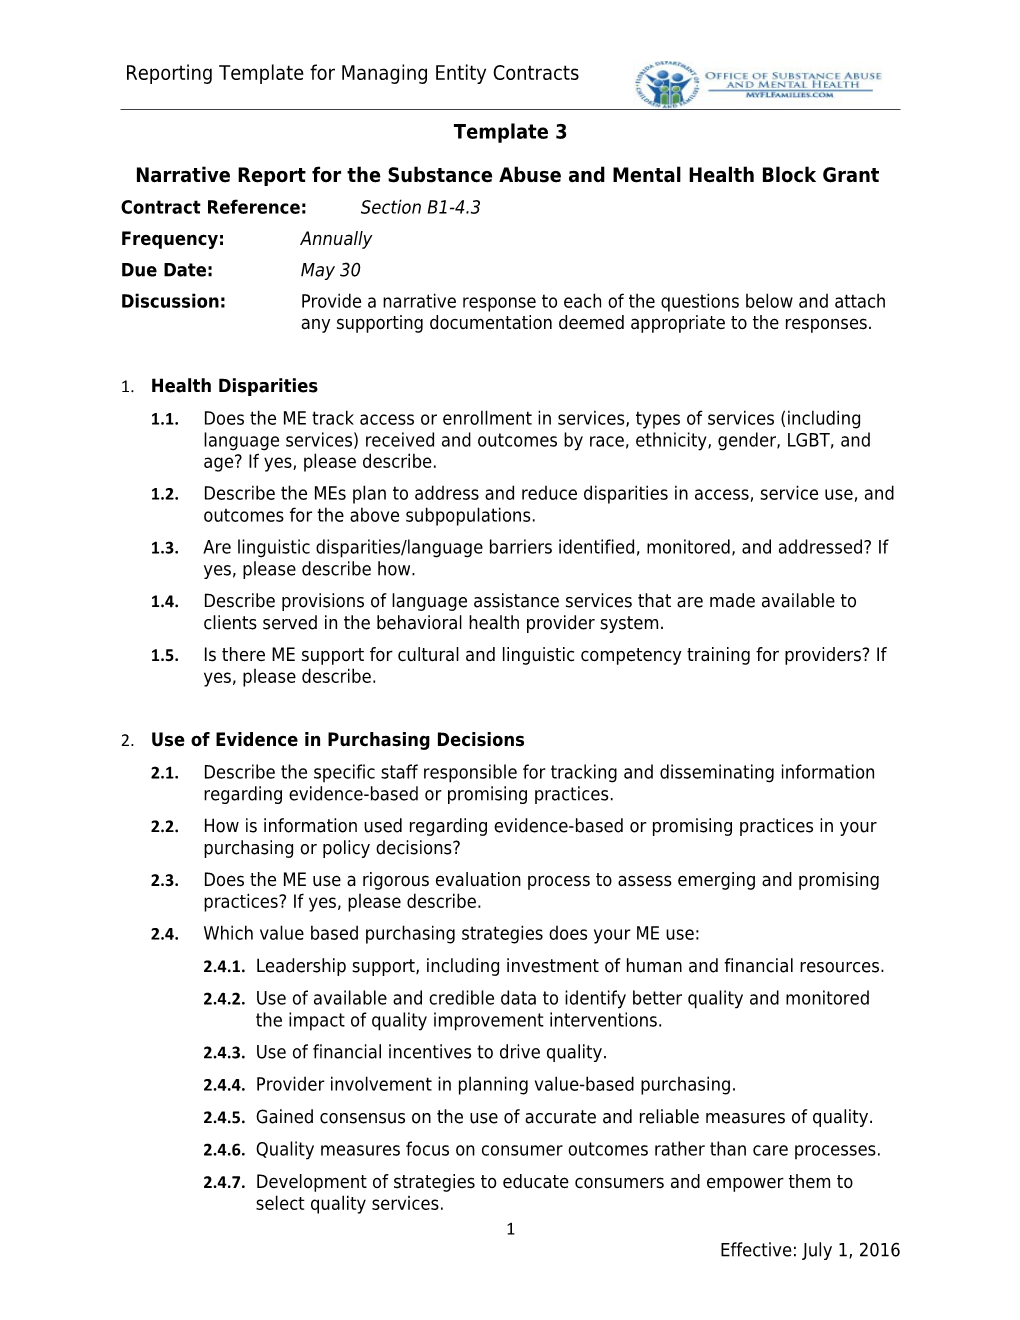 Narrative Report for the Substance Abuse and Mental Health Block Grant s1